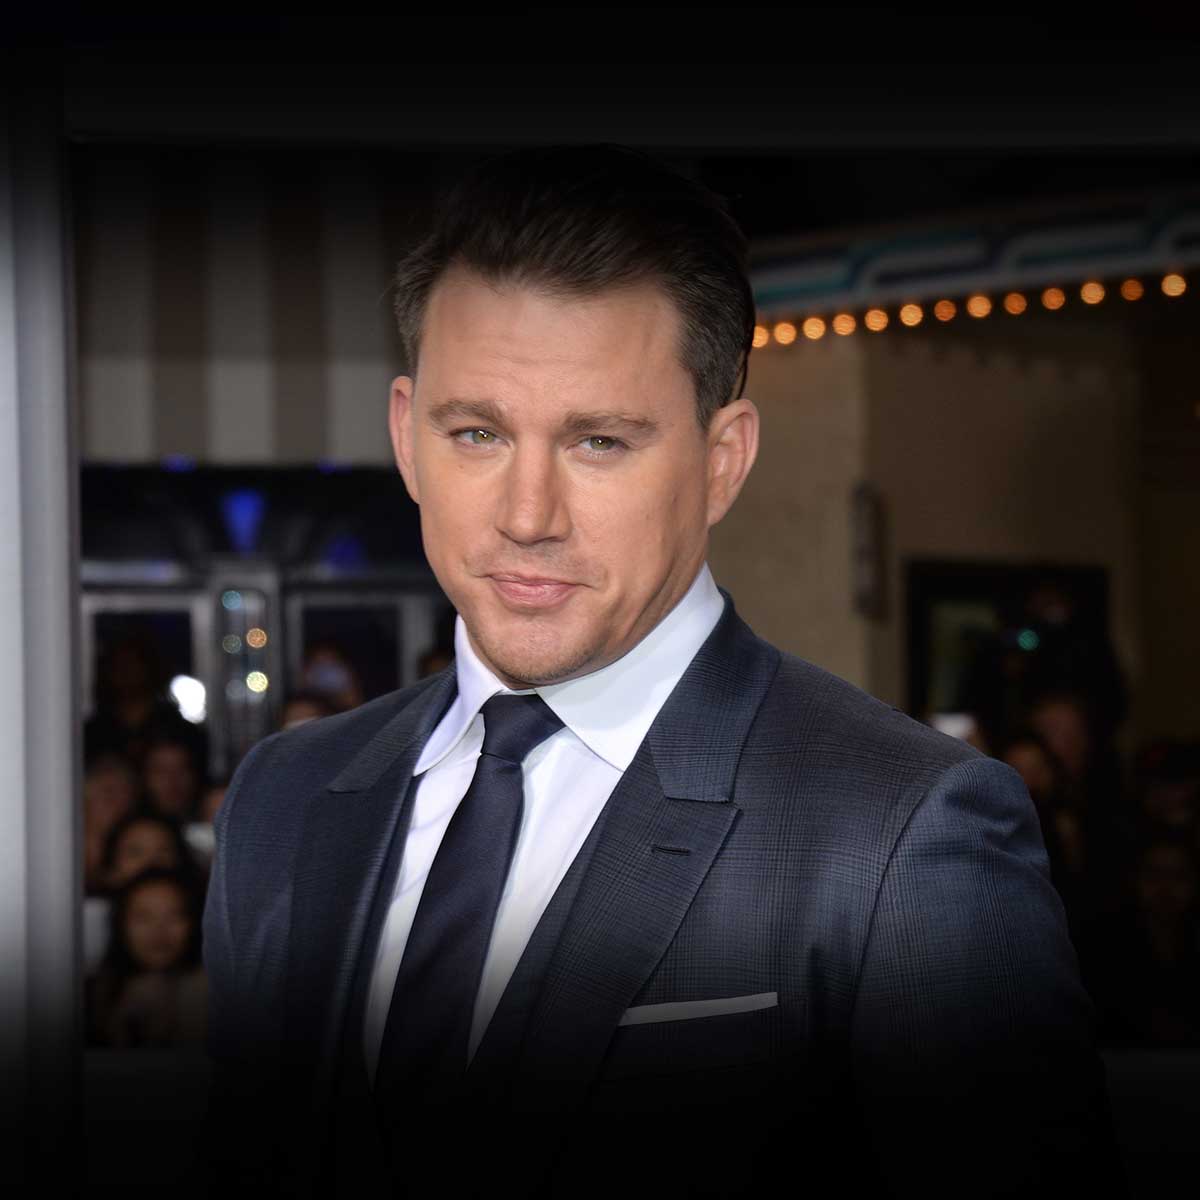 How Old is Channing Tatum?